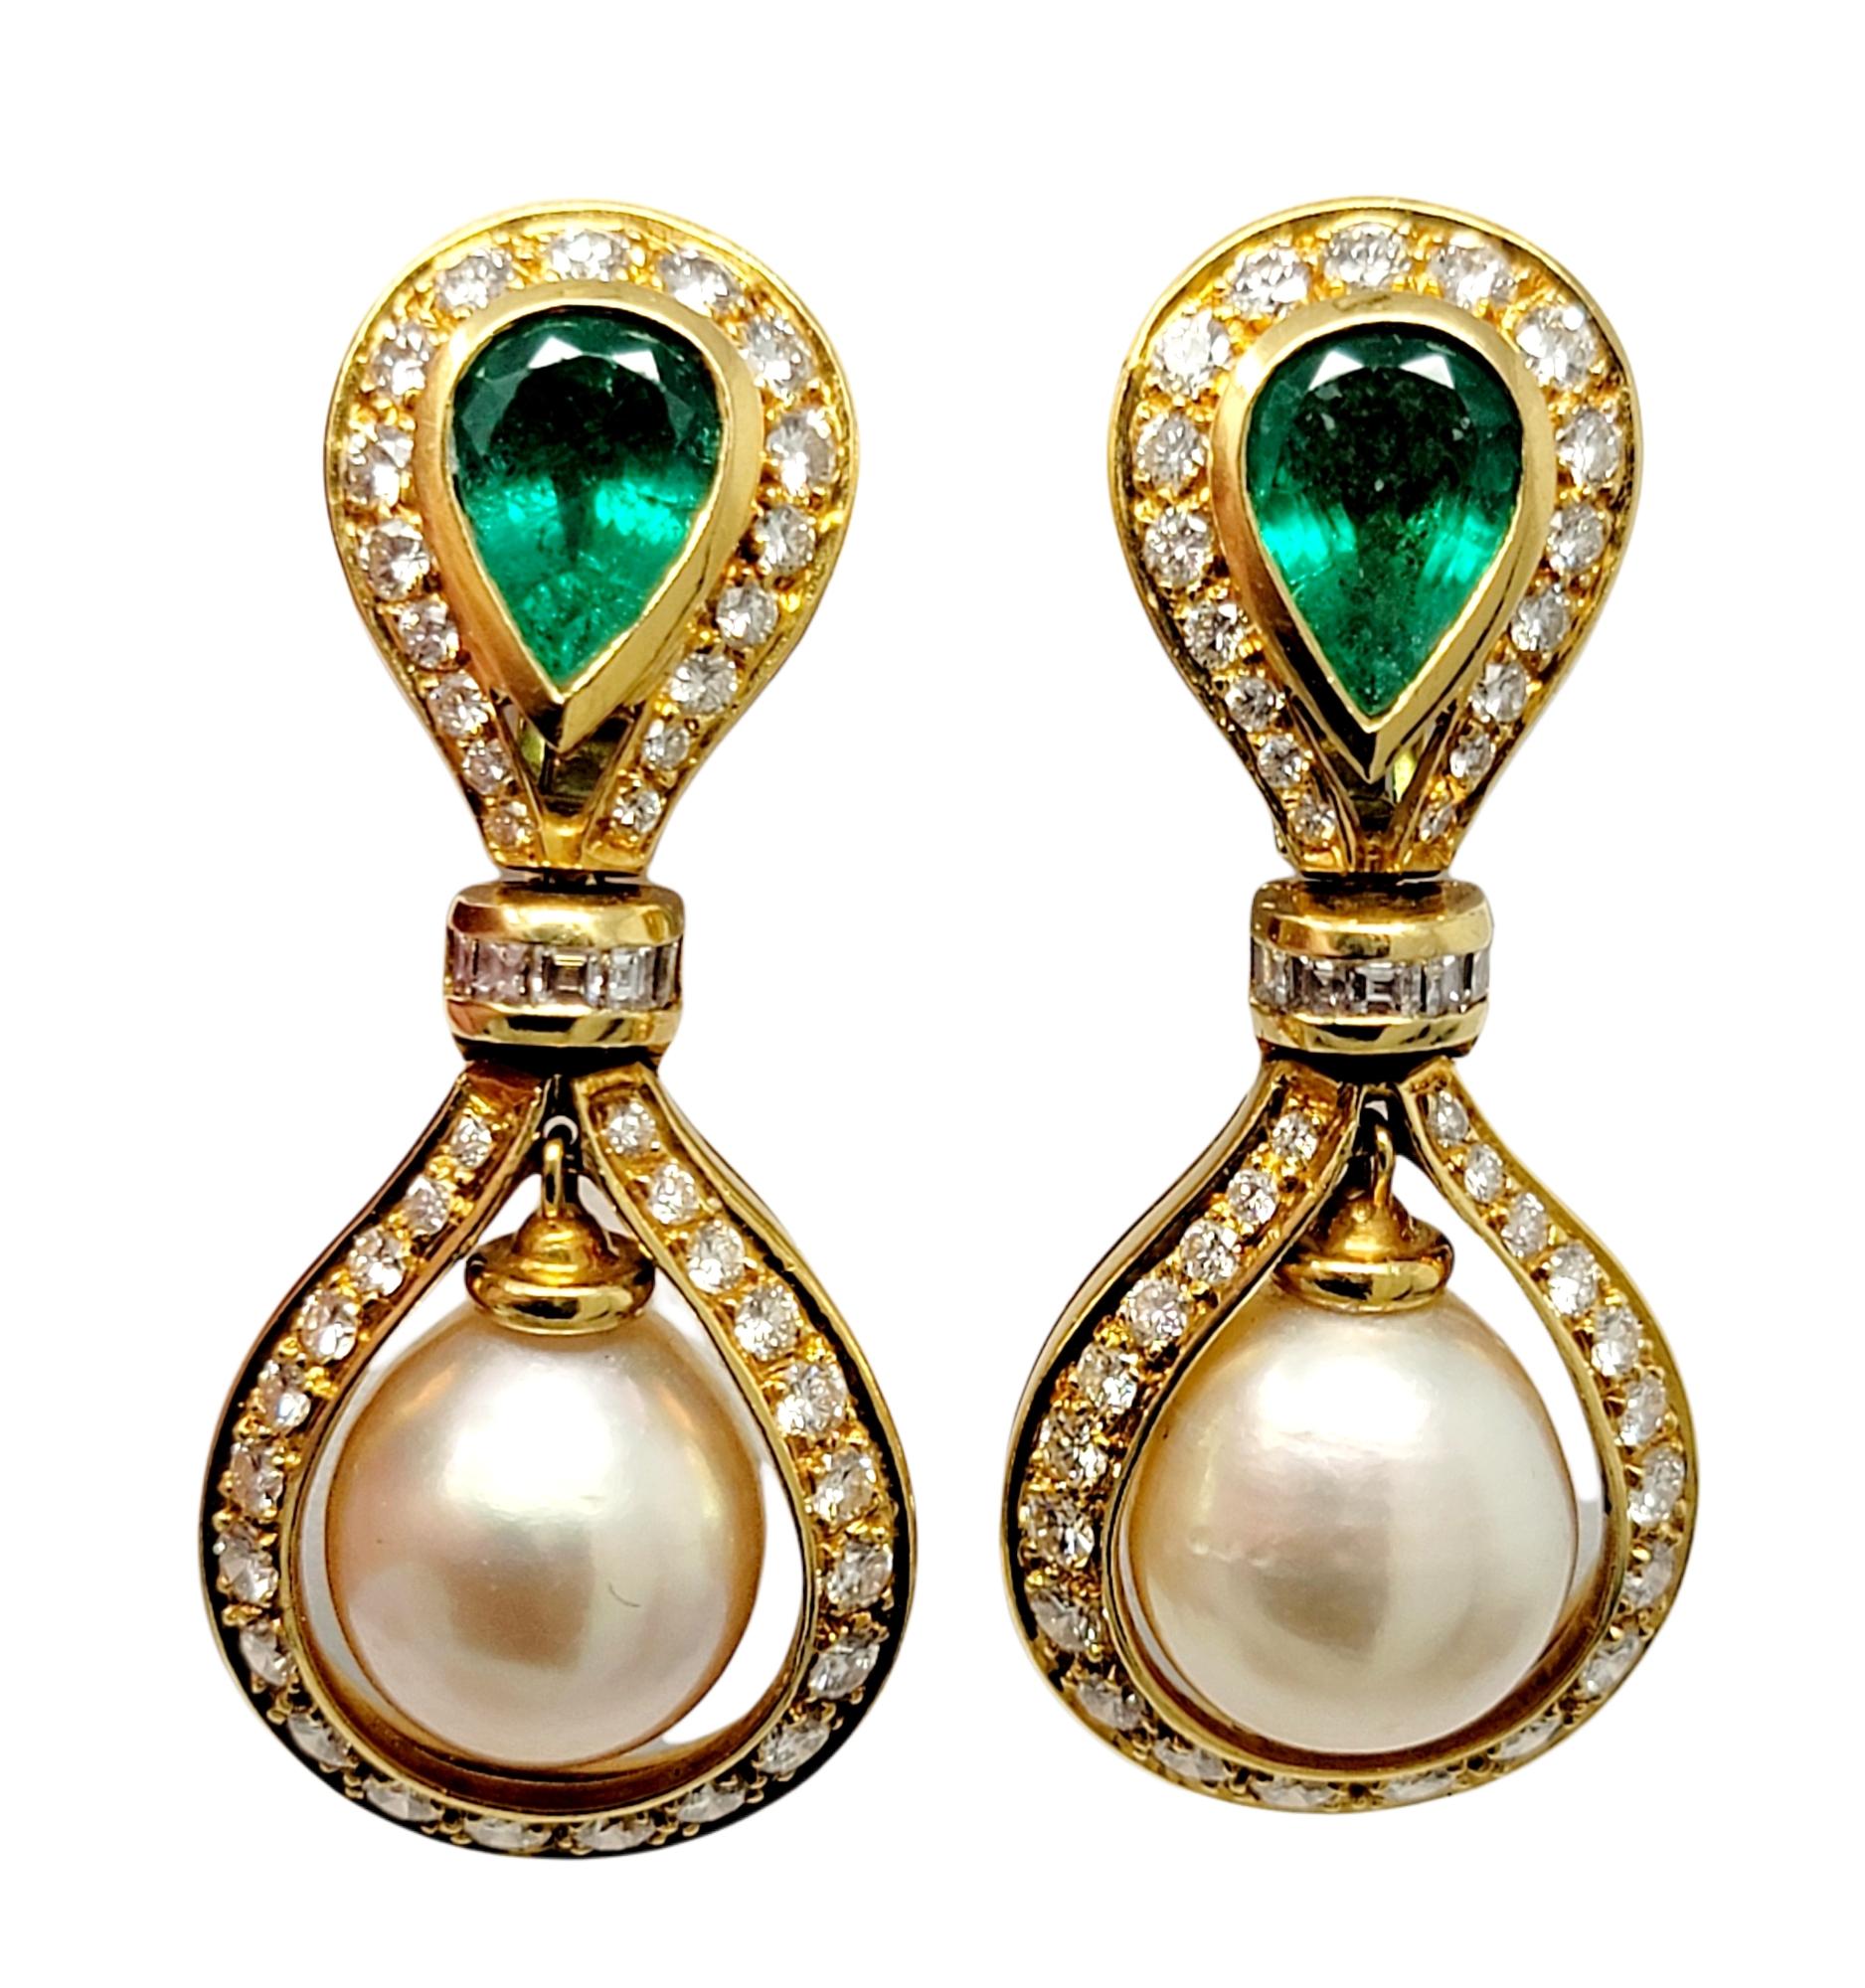 These exquisite dangle earrings exude luxury and elegance. The stunning sparklers are bursting with diamonds, emeralds and pearls for an extravagant look. The gentle movement and length reflects the stones from all angles, making them sparkle